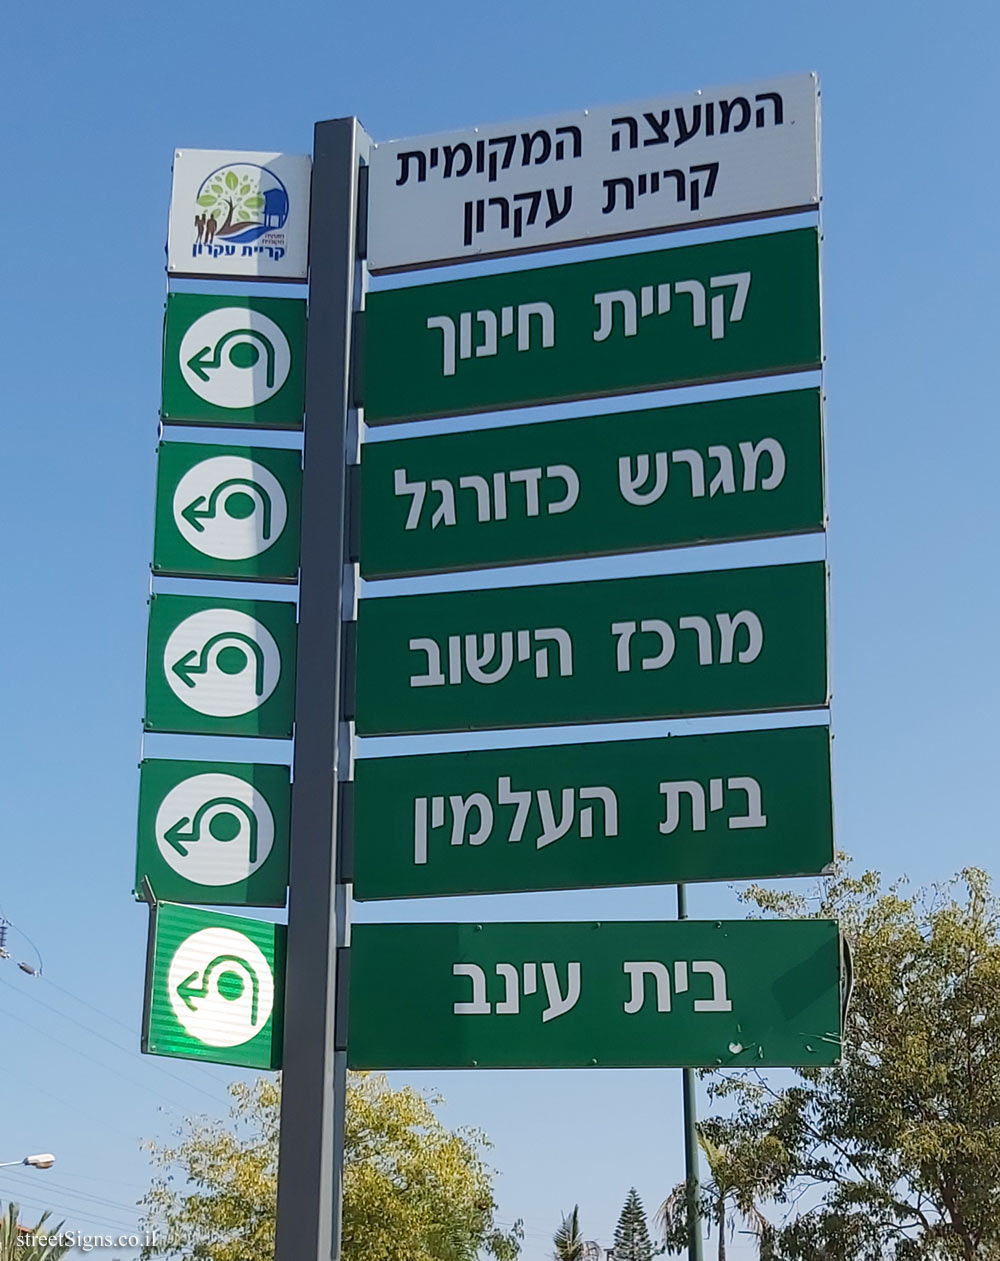 Kiryat Ekron - A direction sign pointing to places in the locality